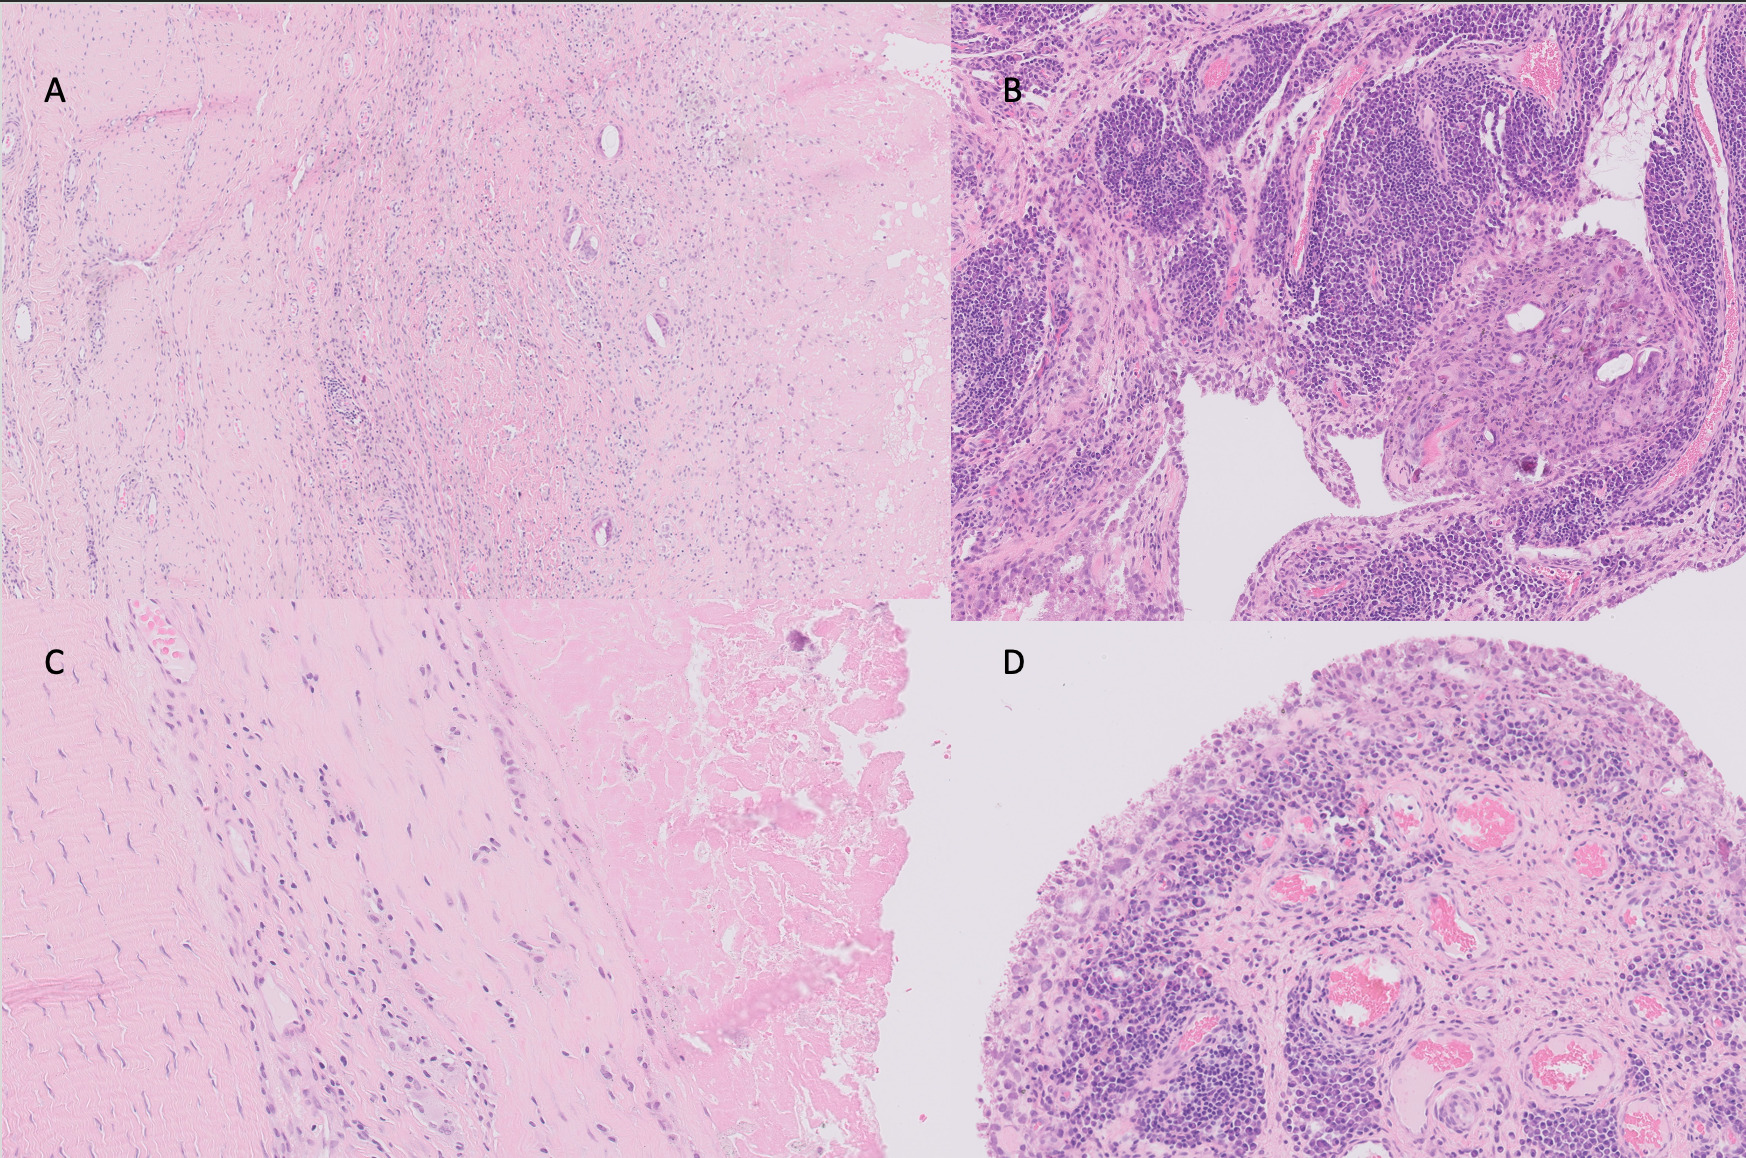 Fig. 2 
          Synovial tissue histology. a) Foreign body reaction with epithelial necrosis and macrophages. b) Chronic inflammation with perivascular plasma cells. c) Epithelial necrosis and fibrosis formation. d) Perivascular plasma cells and lymphocytes. All images were first scanned with Pathology Scanner SG300 (Philips, Netherlands), and then images were captured with Intellisite Image Management System (Philips).
        